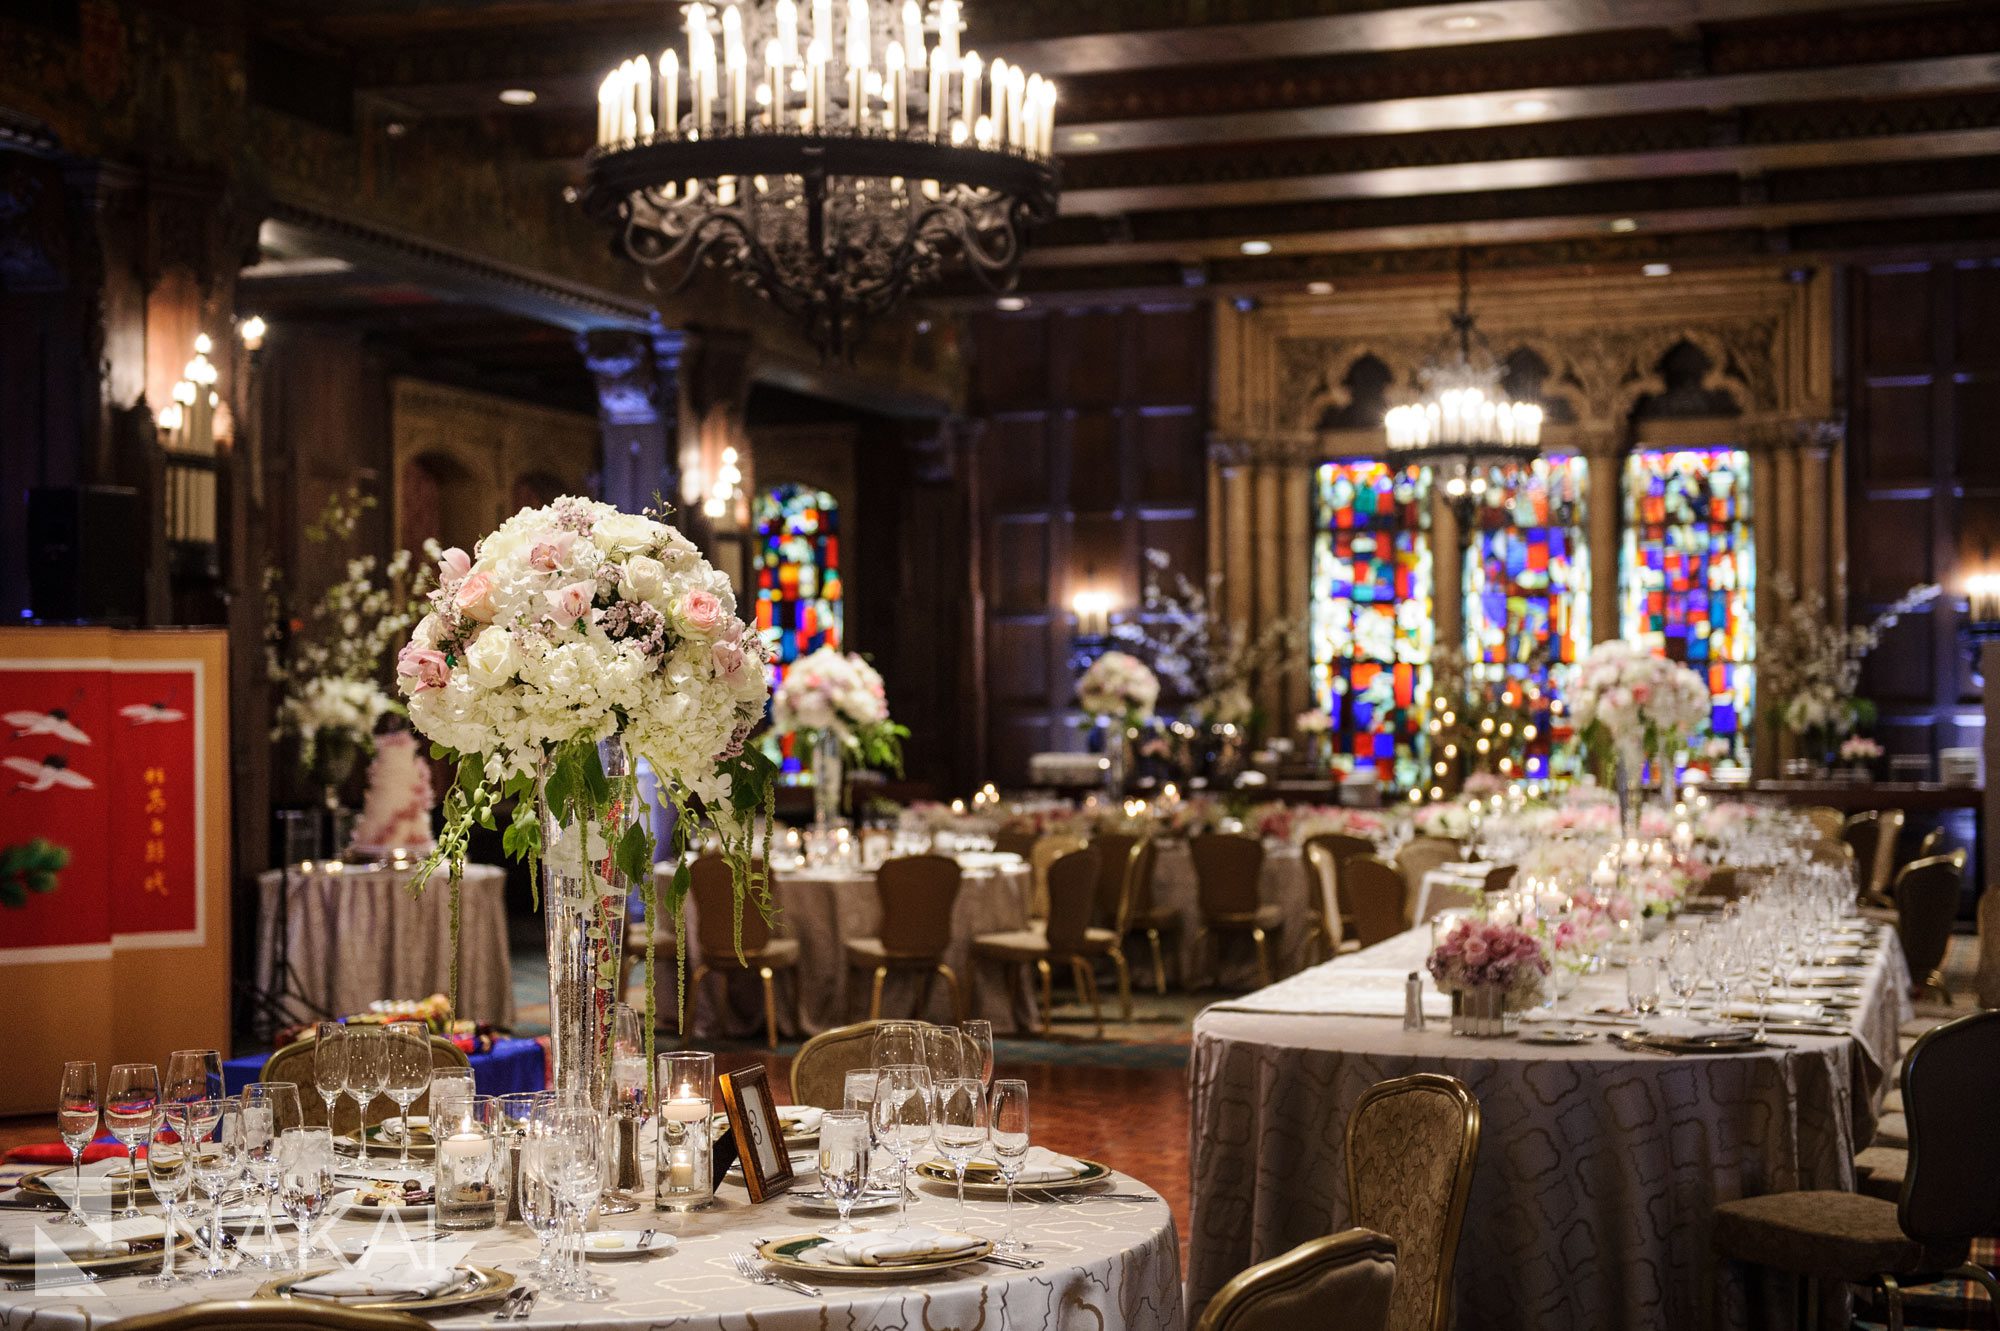 intercontinental mag mile wedding photo chicago hall of lions wedding reception table